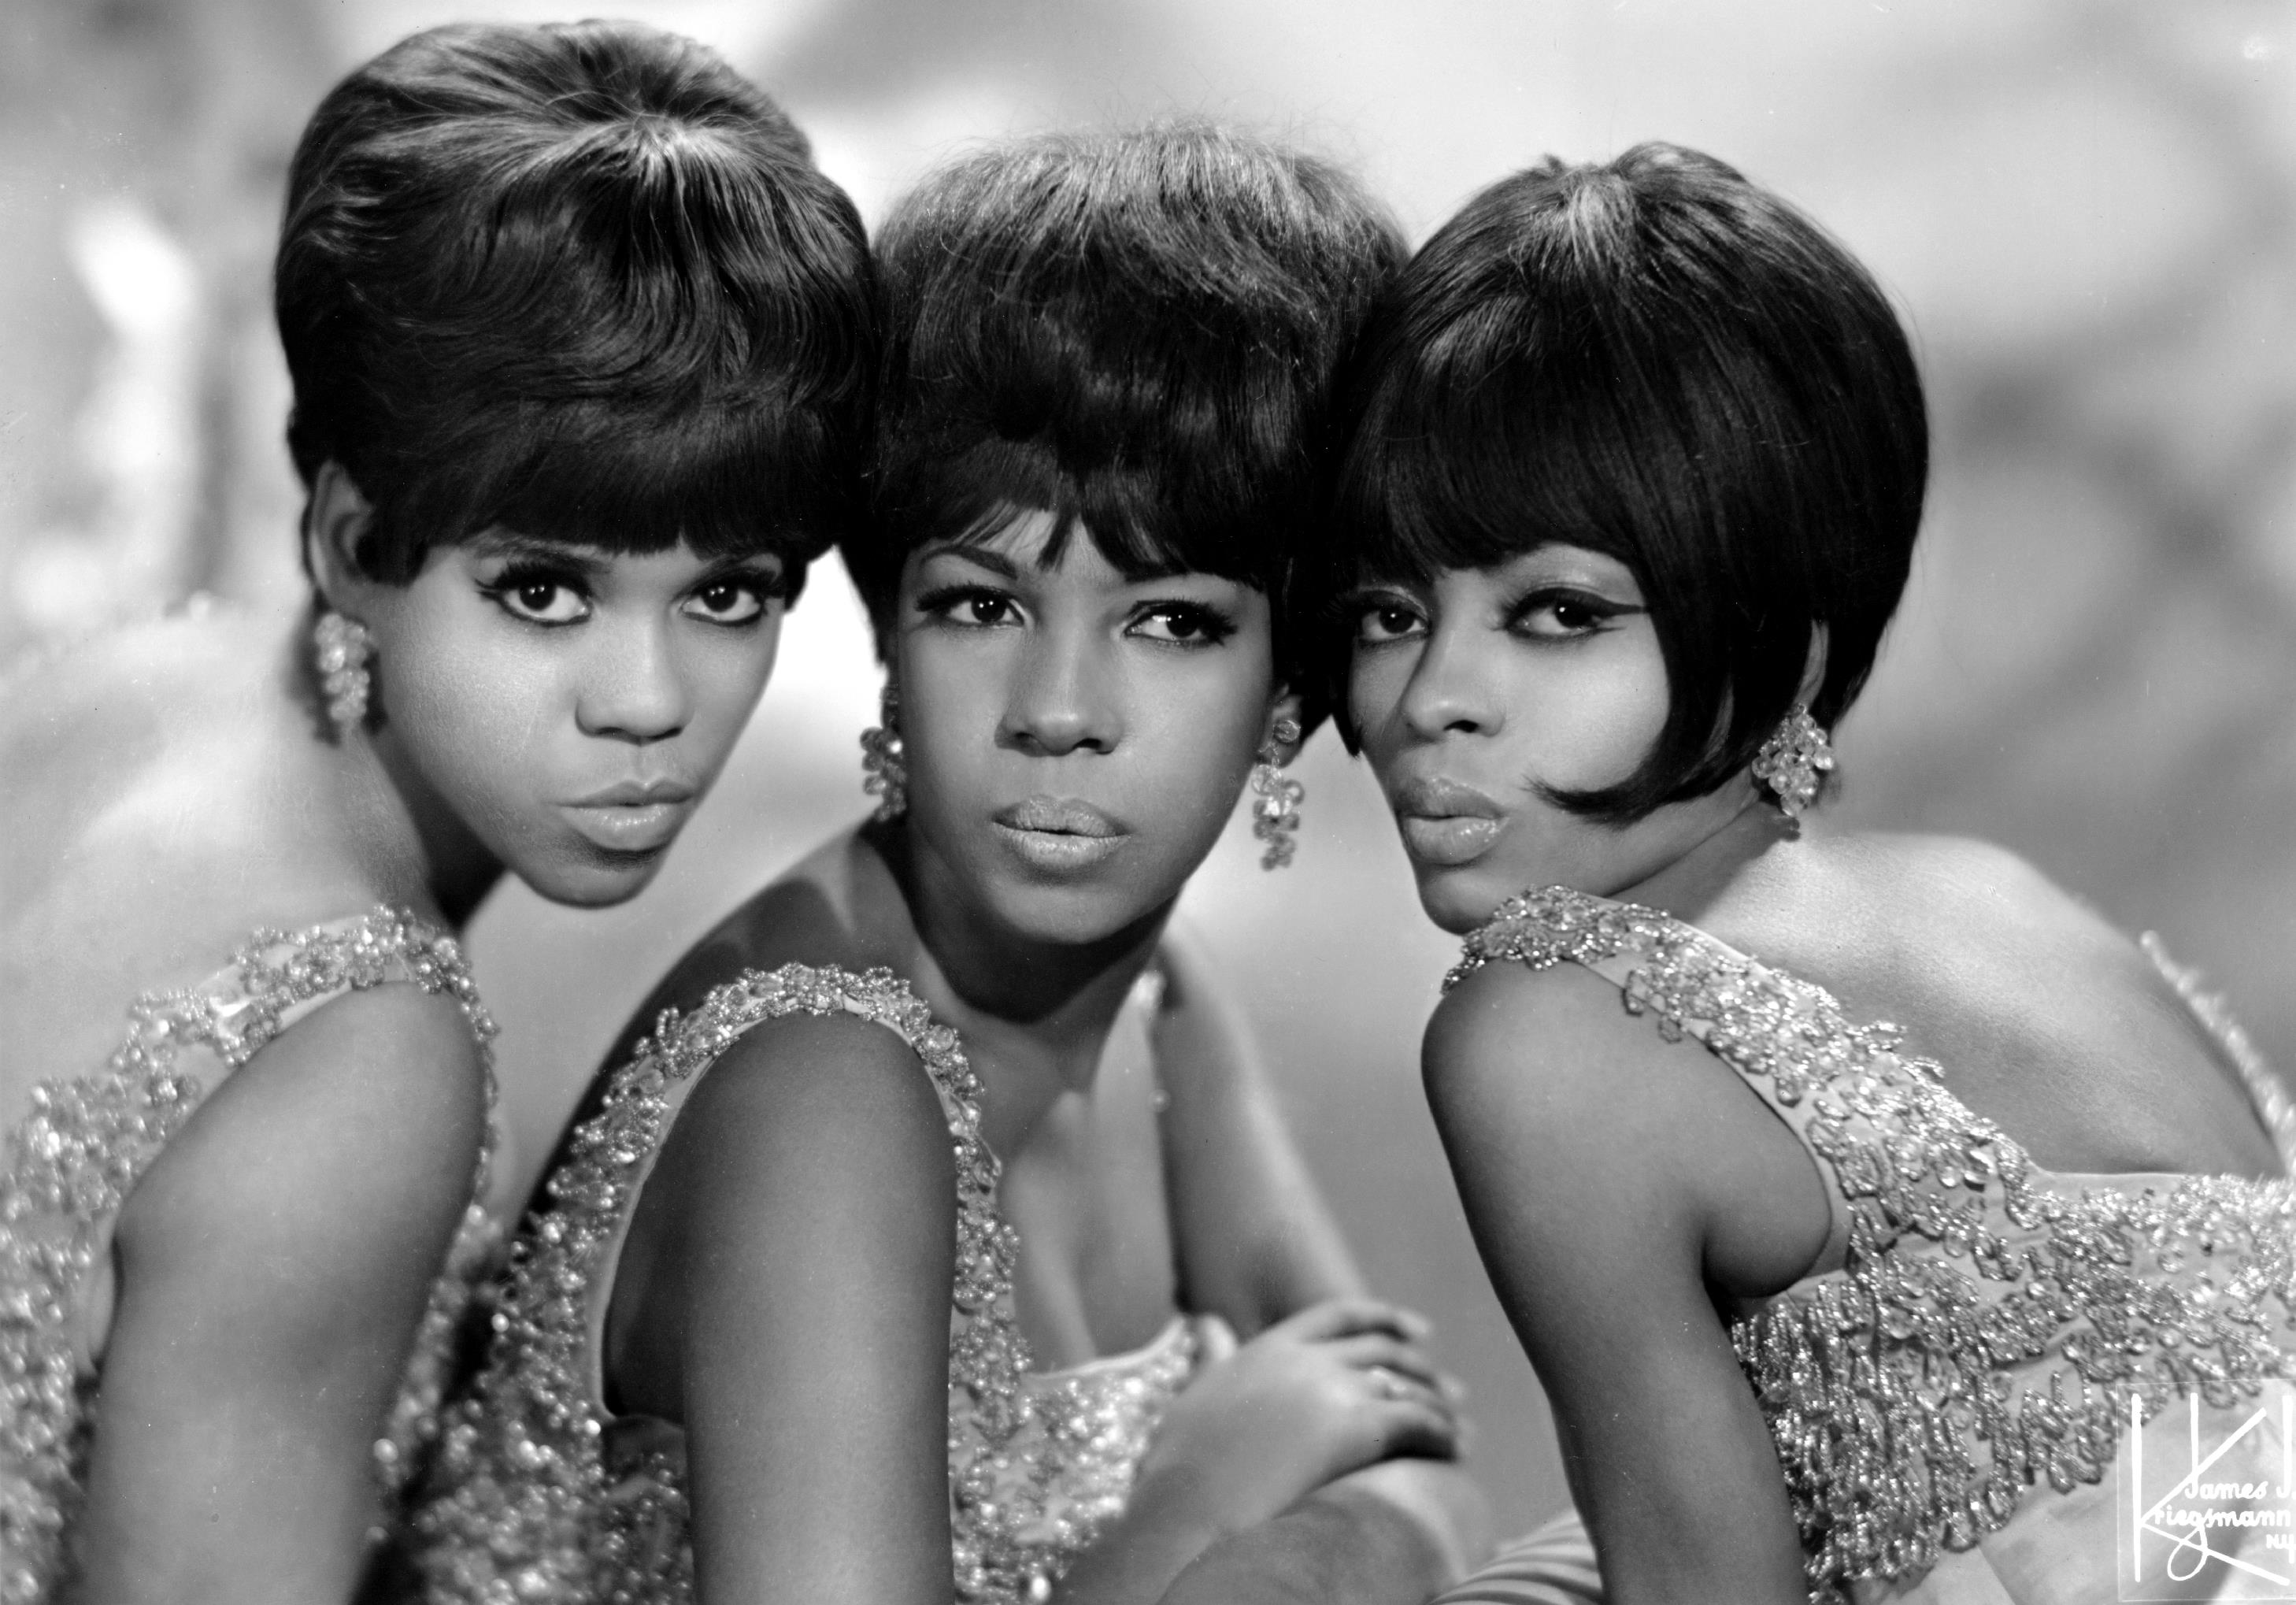 The Supremes in a row